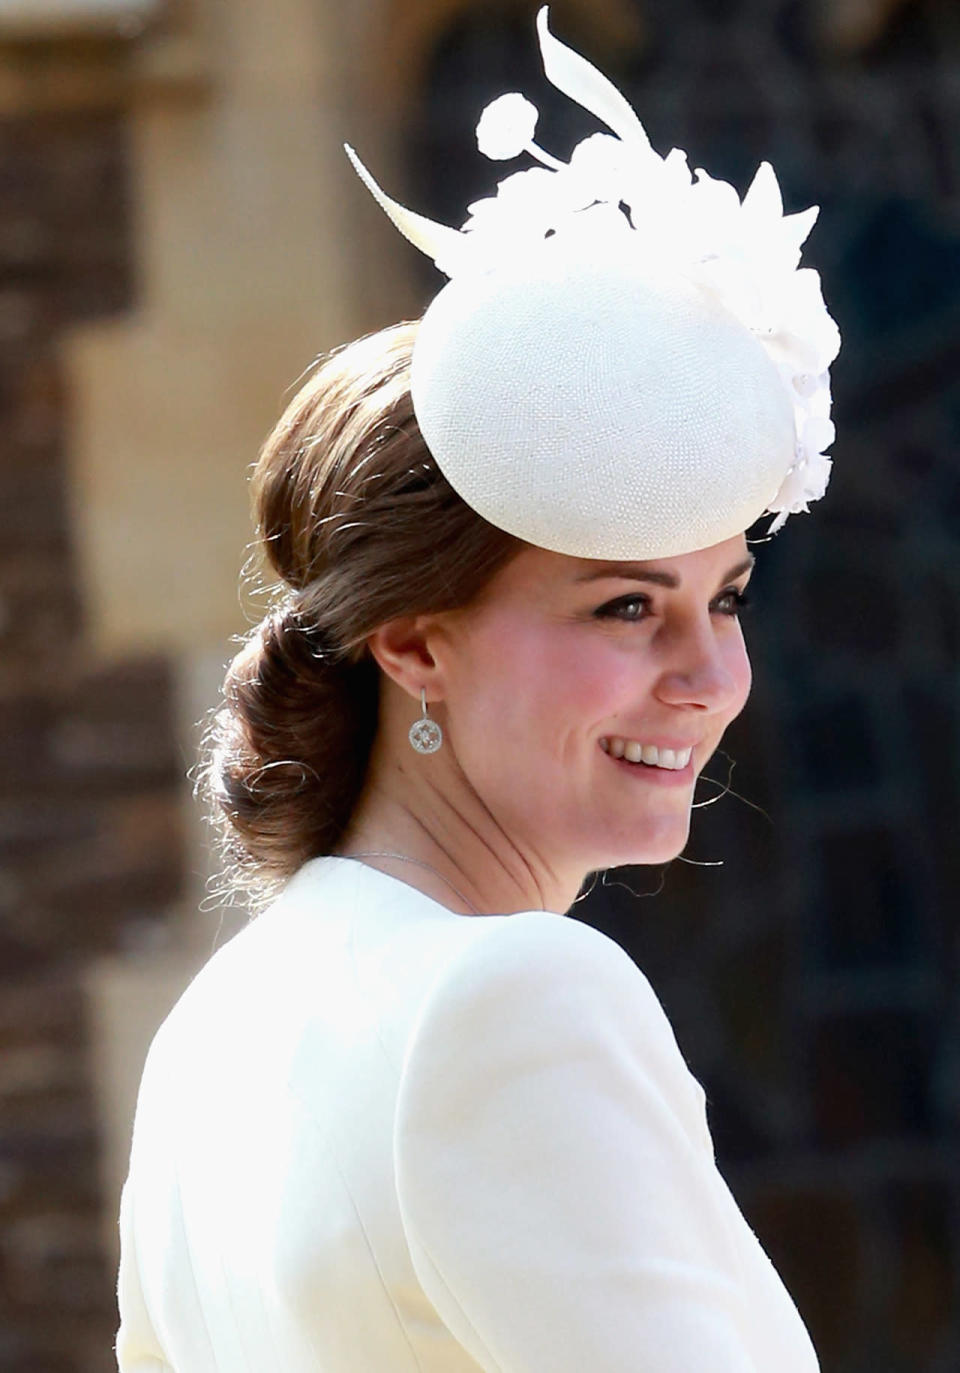 Scroll through the gallery for some royal style inspiration. We promise we won’t tell Kate.